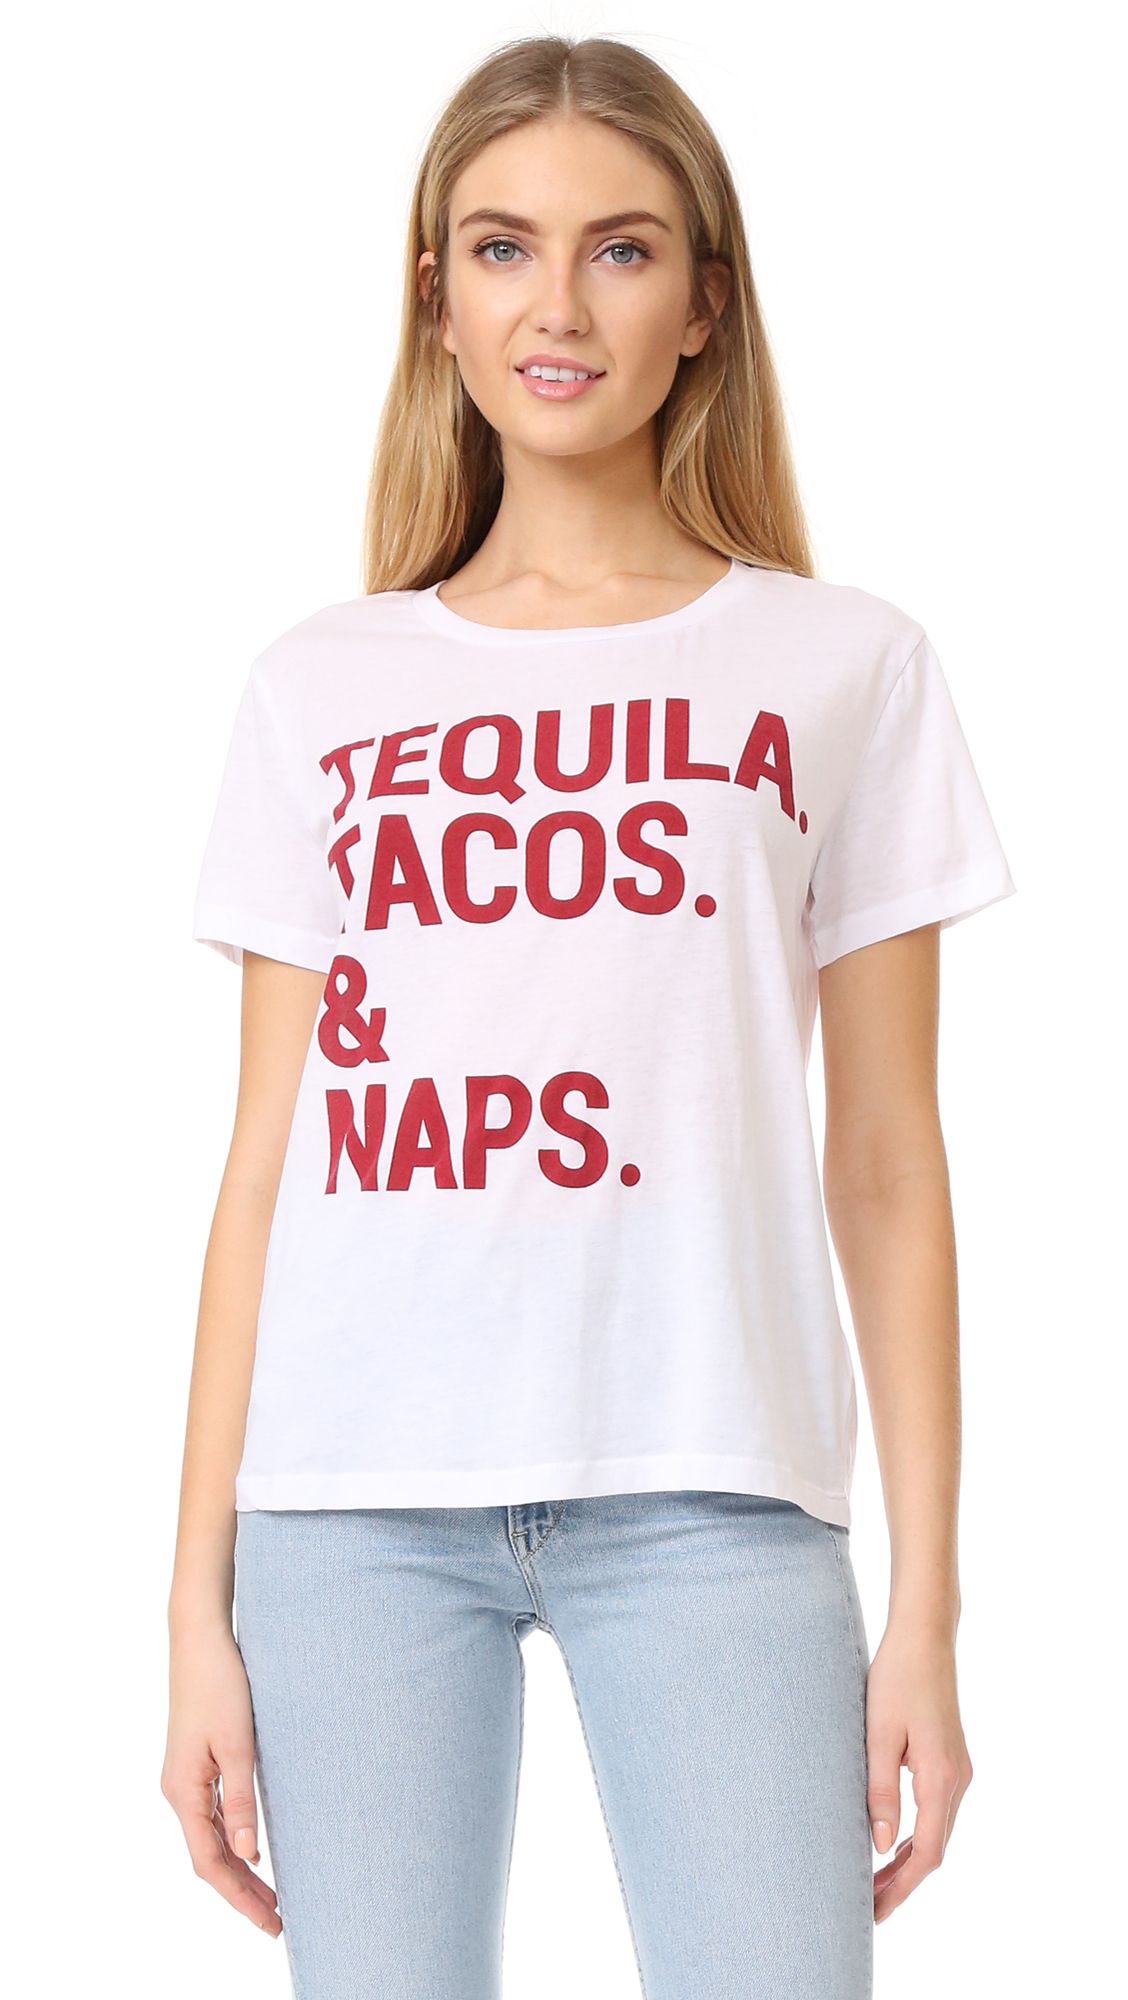 Tequila Tacos and Naps Tee | Shopbop